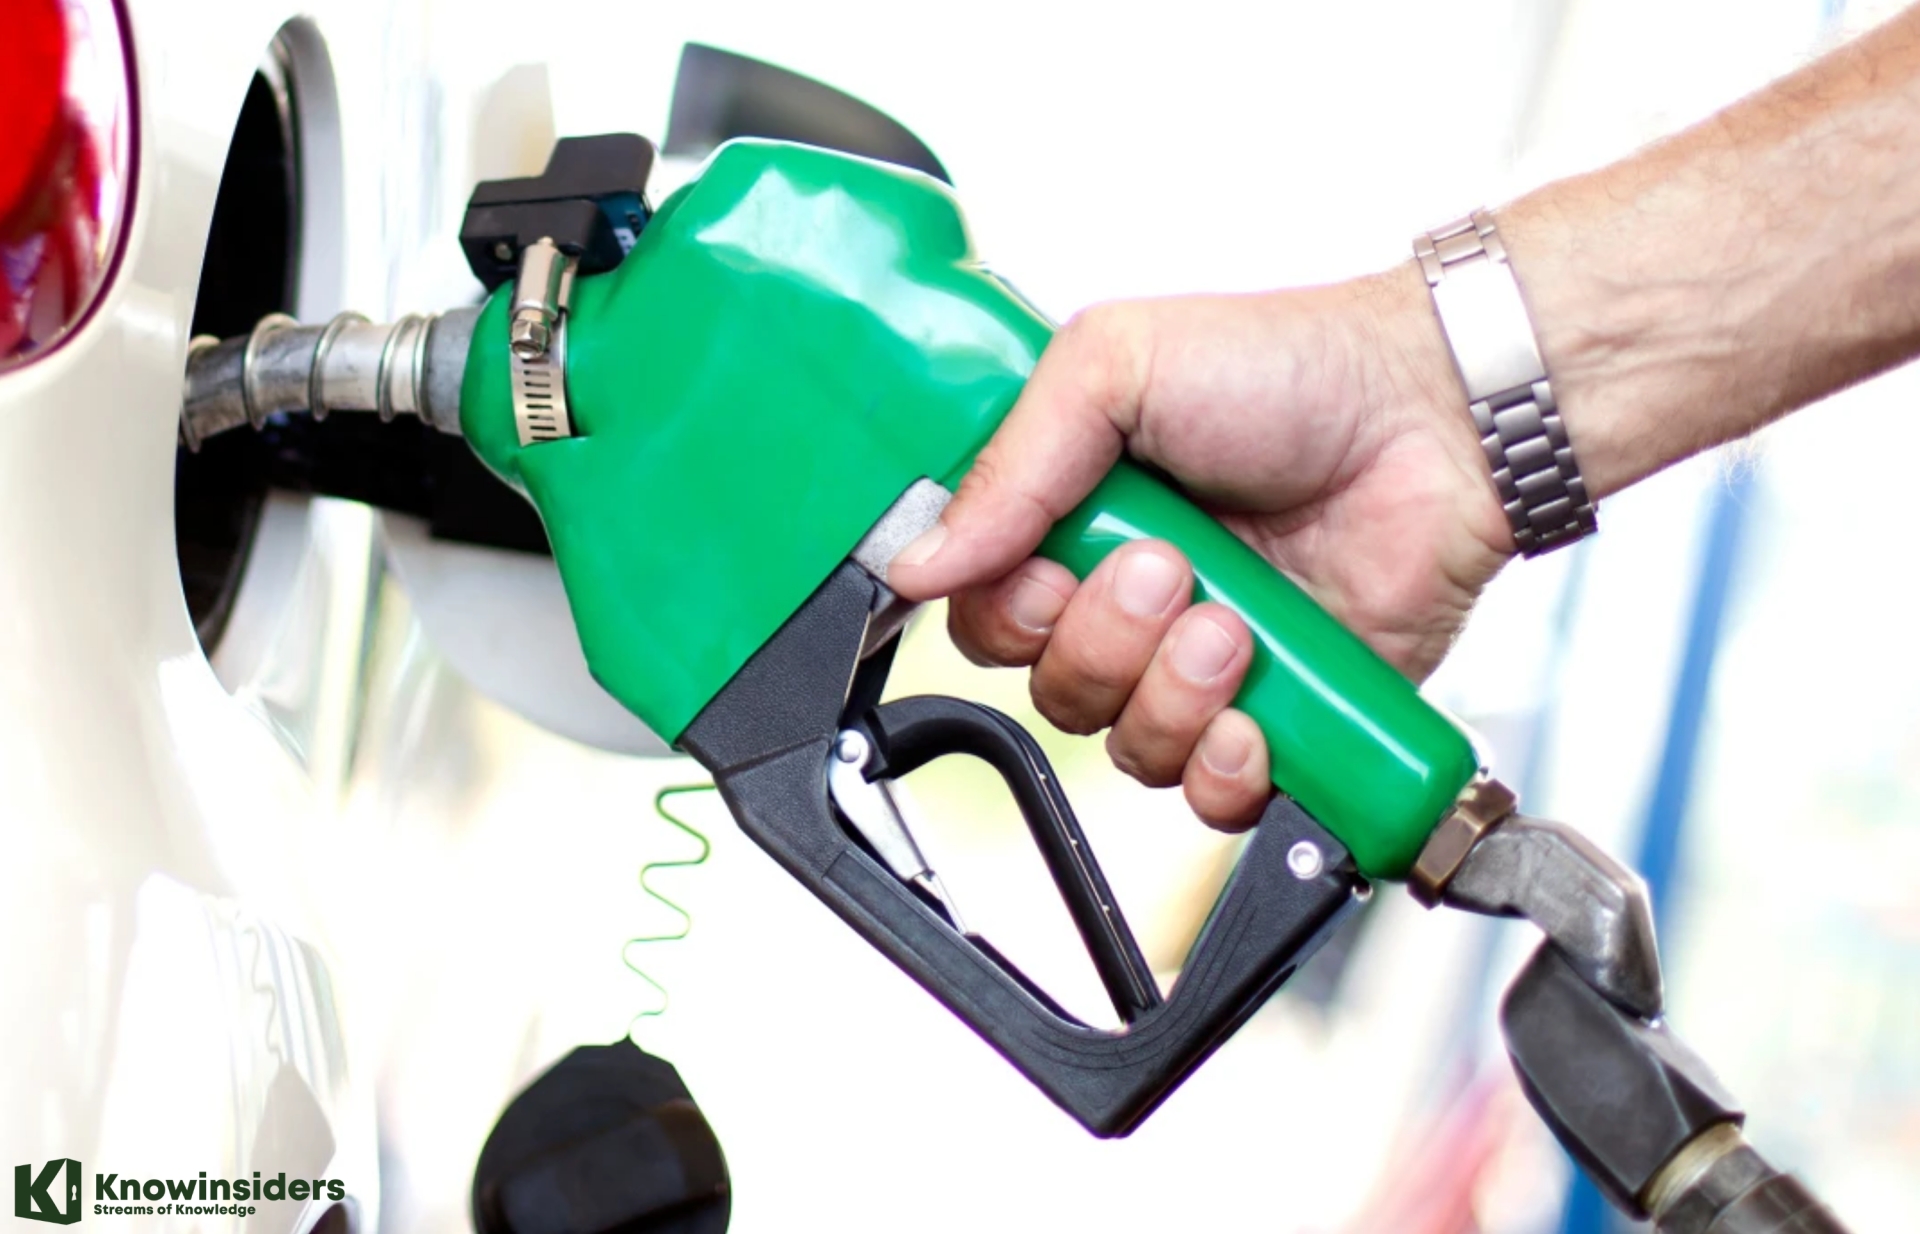 Top 10 Countries With The Cheapest Petrol Price & They Are Truly Dreamlands